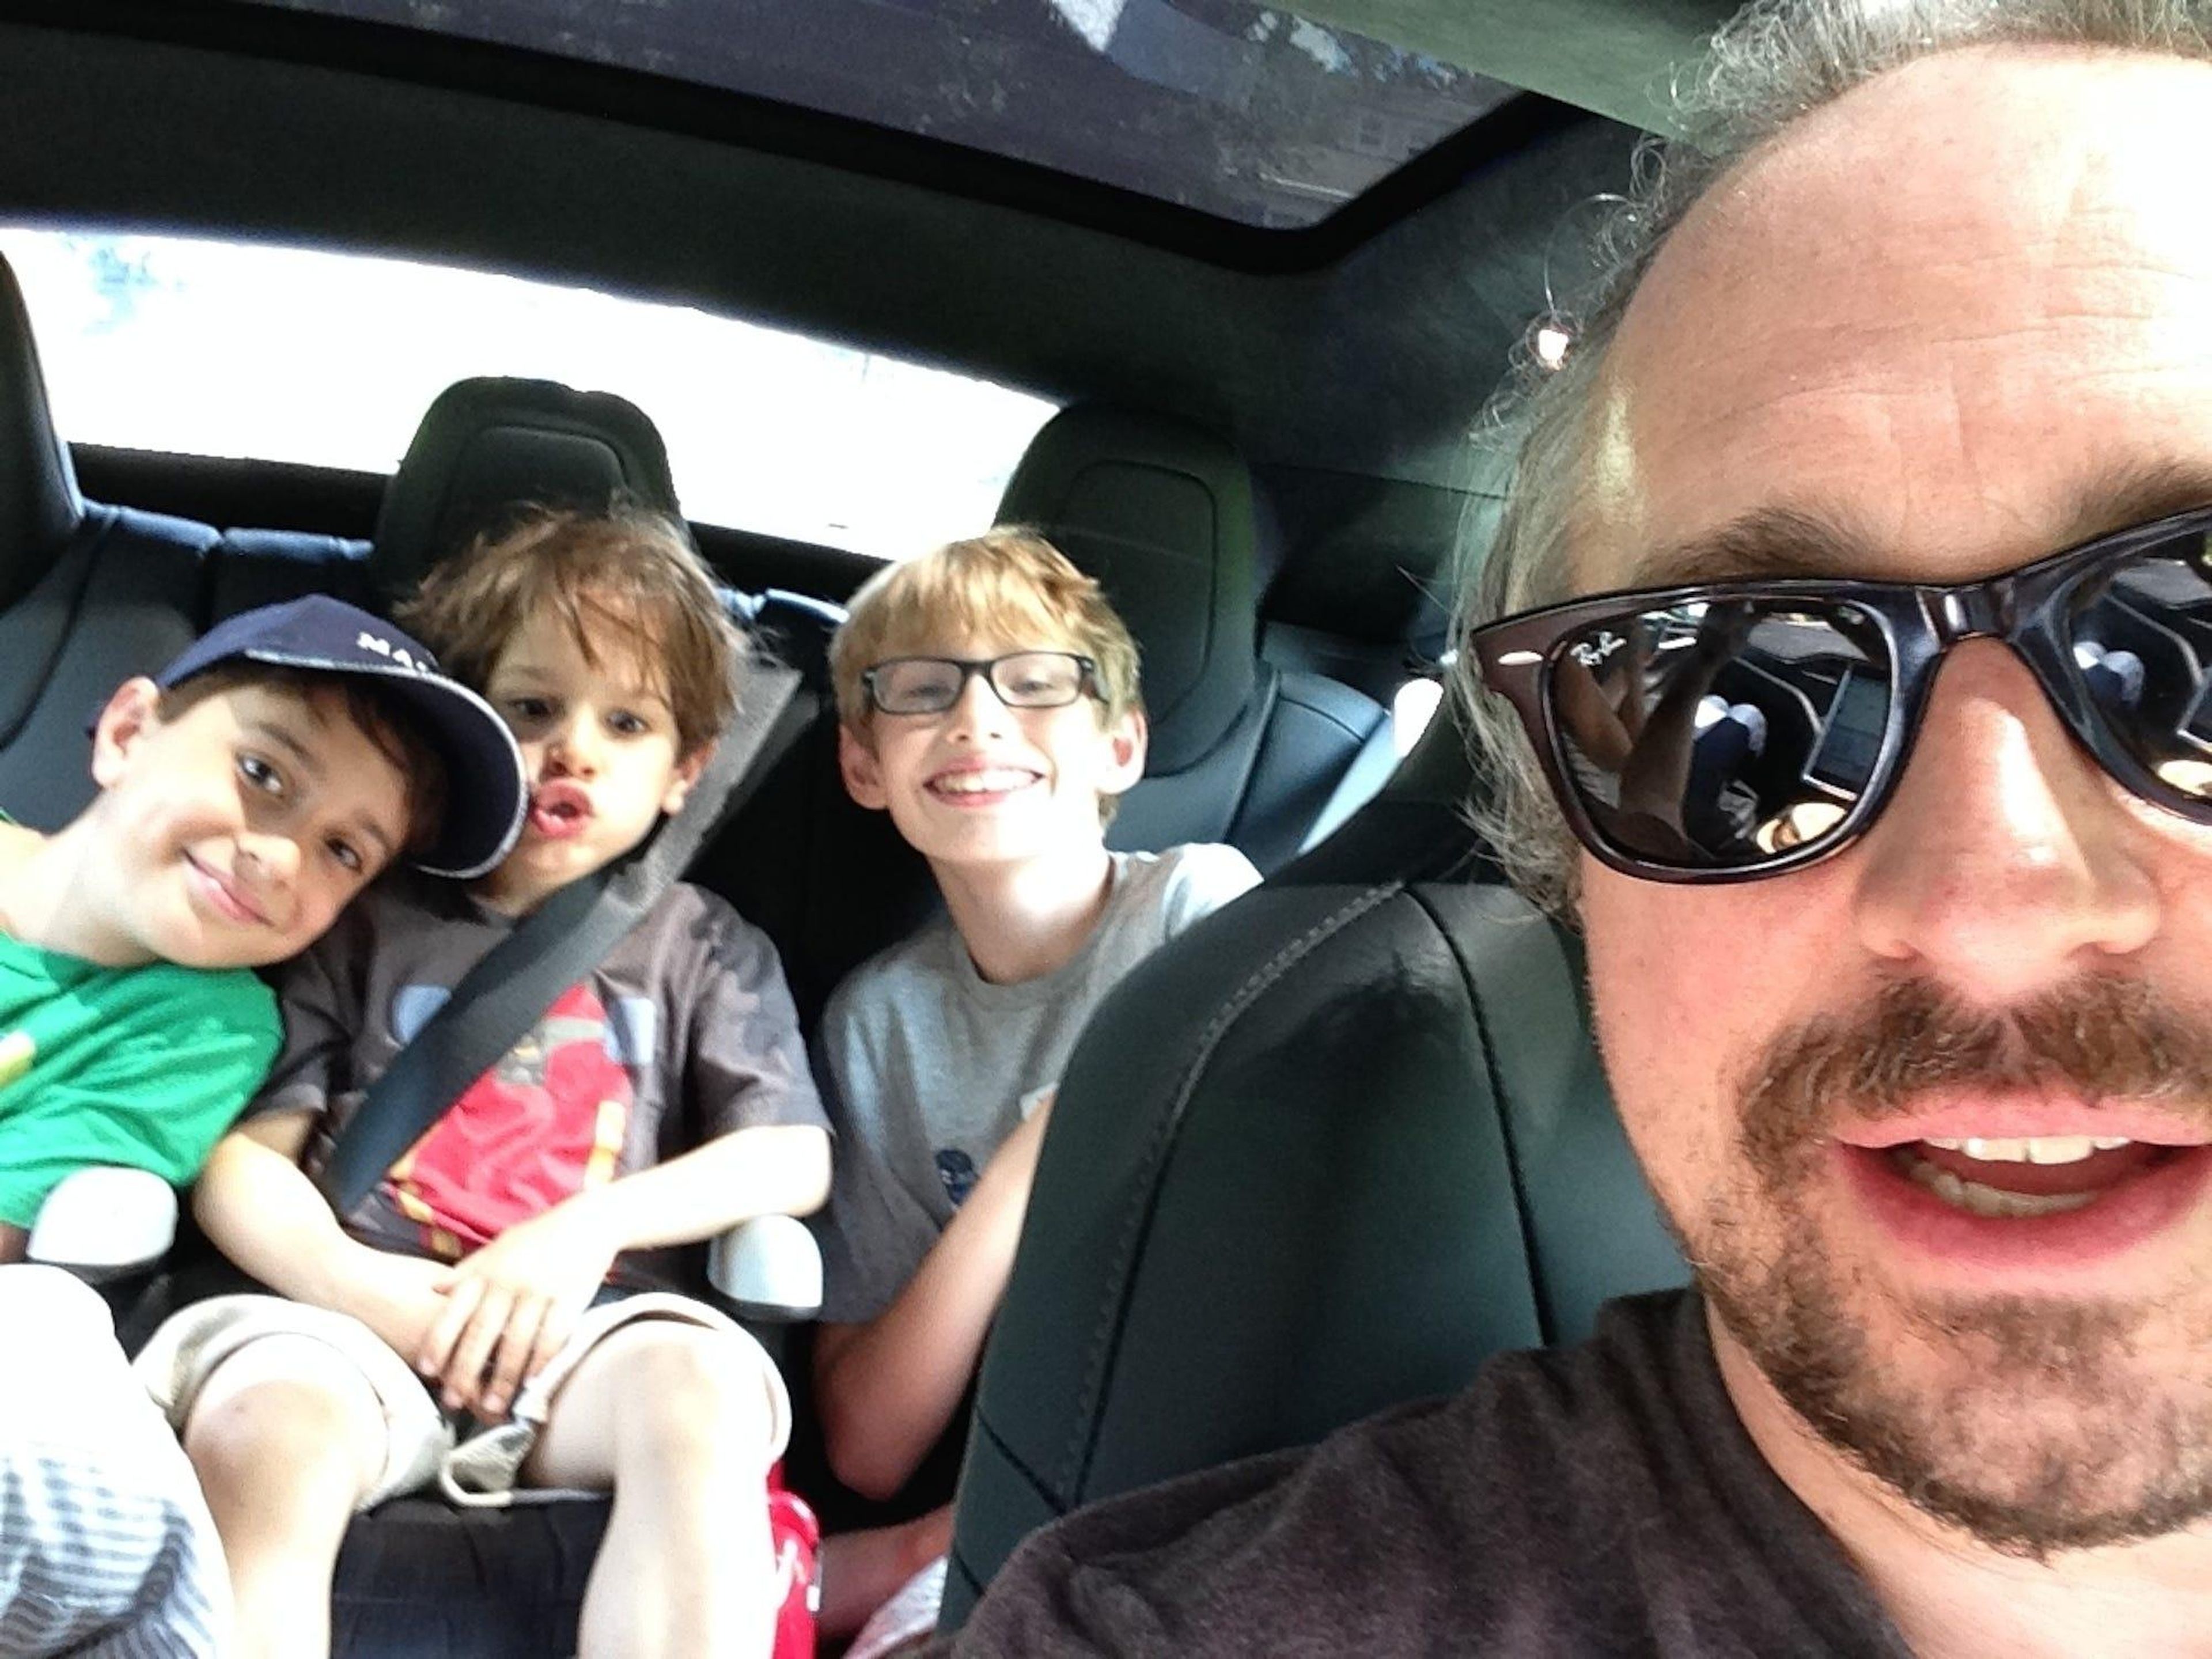 The Model S has ample space in the back seat for three kids, and two adults would be relatively comfortable.